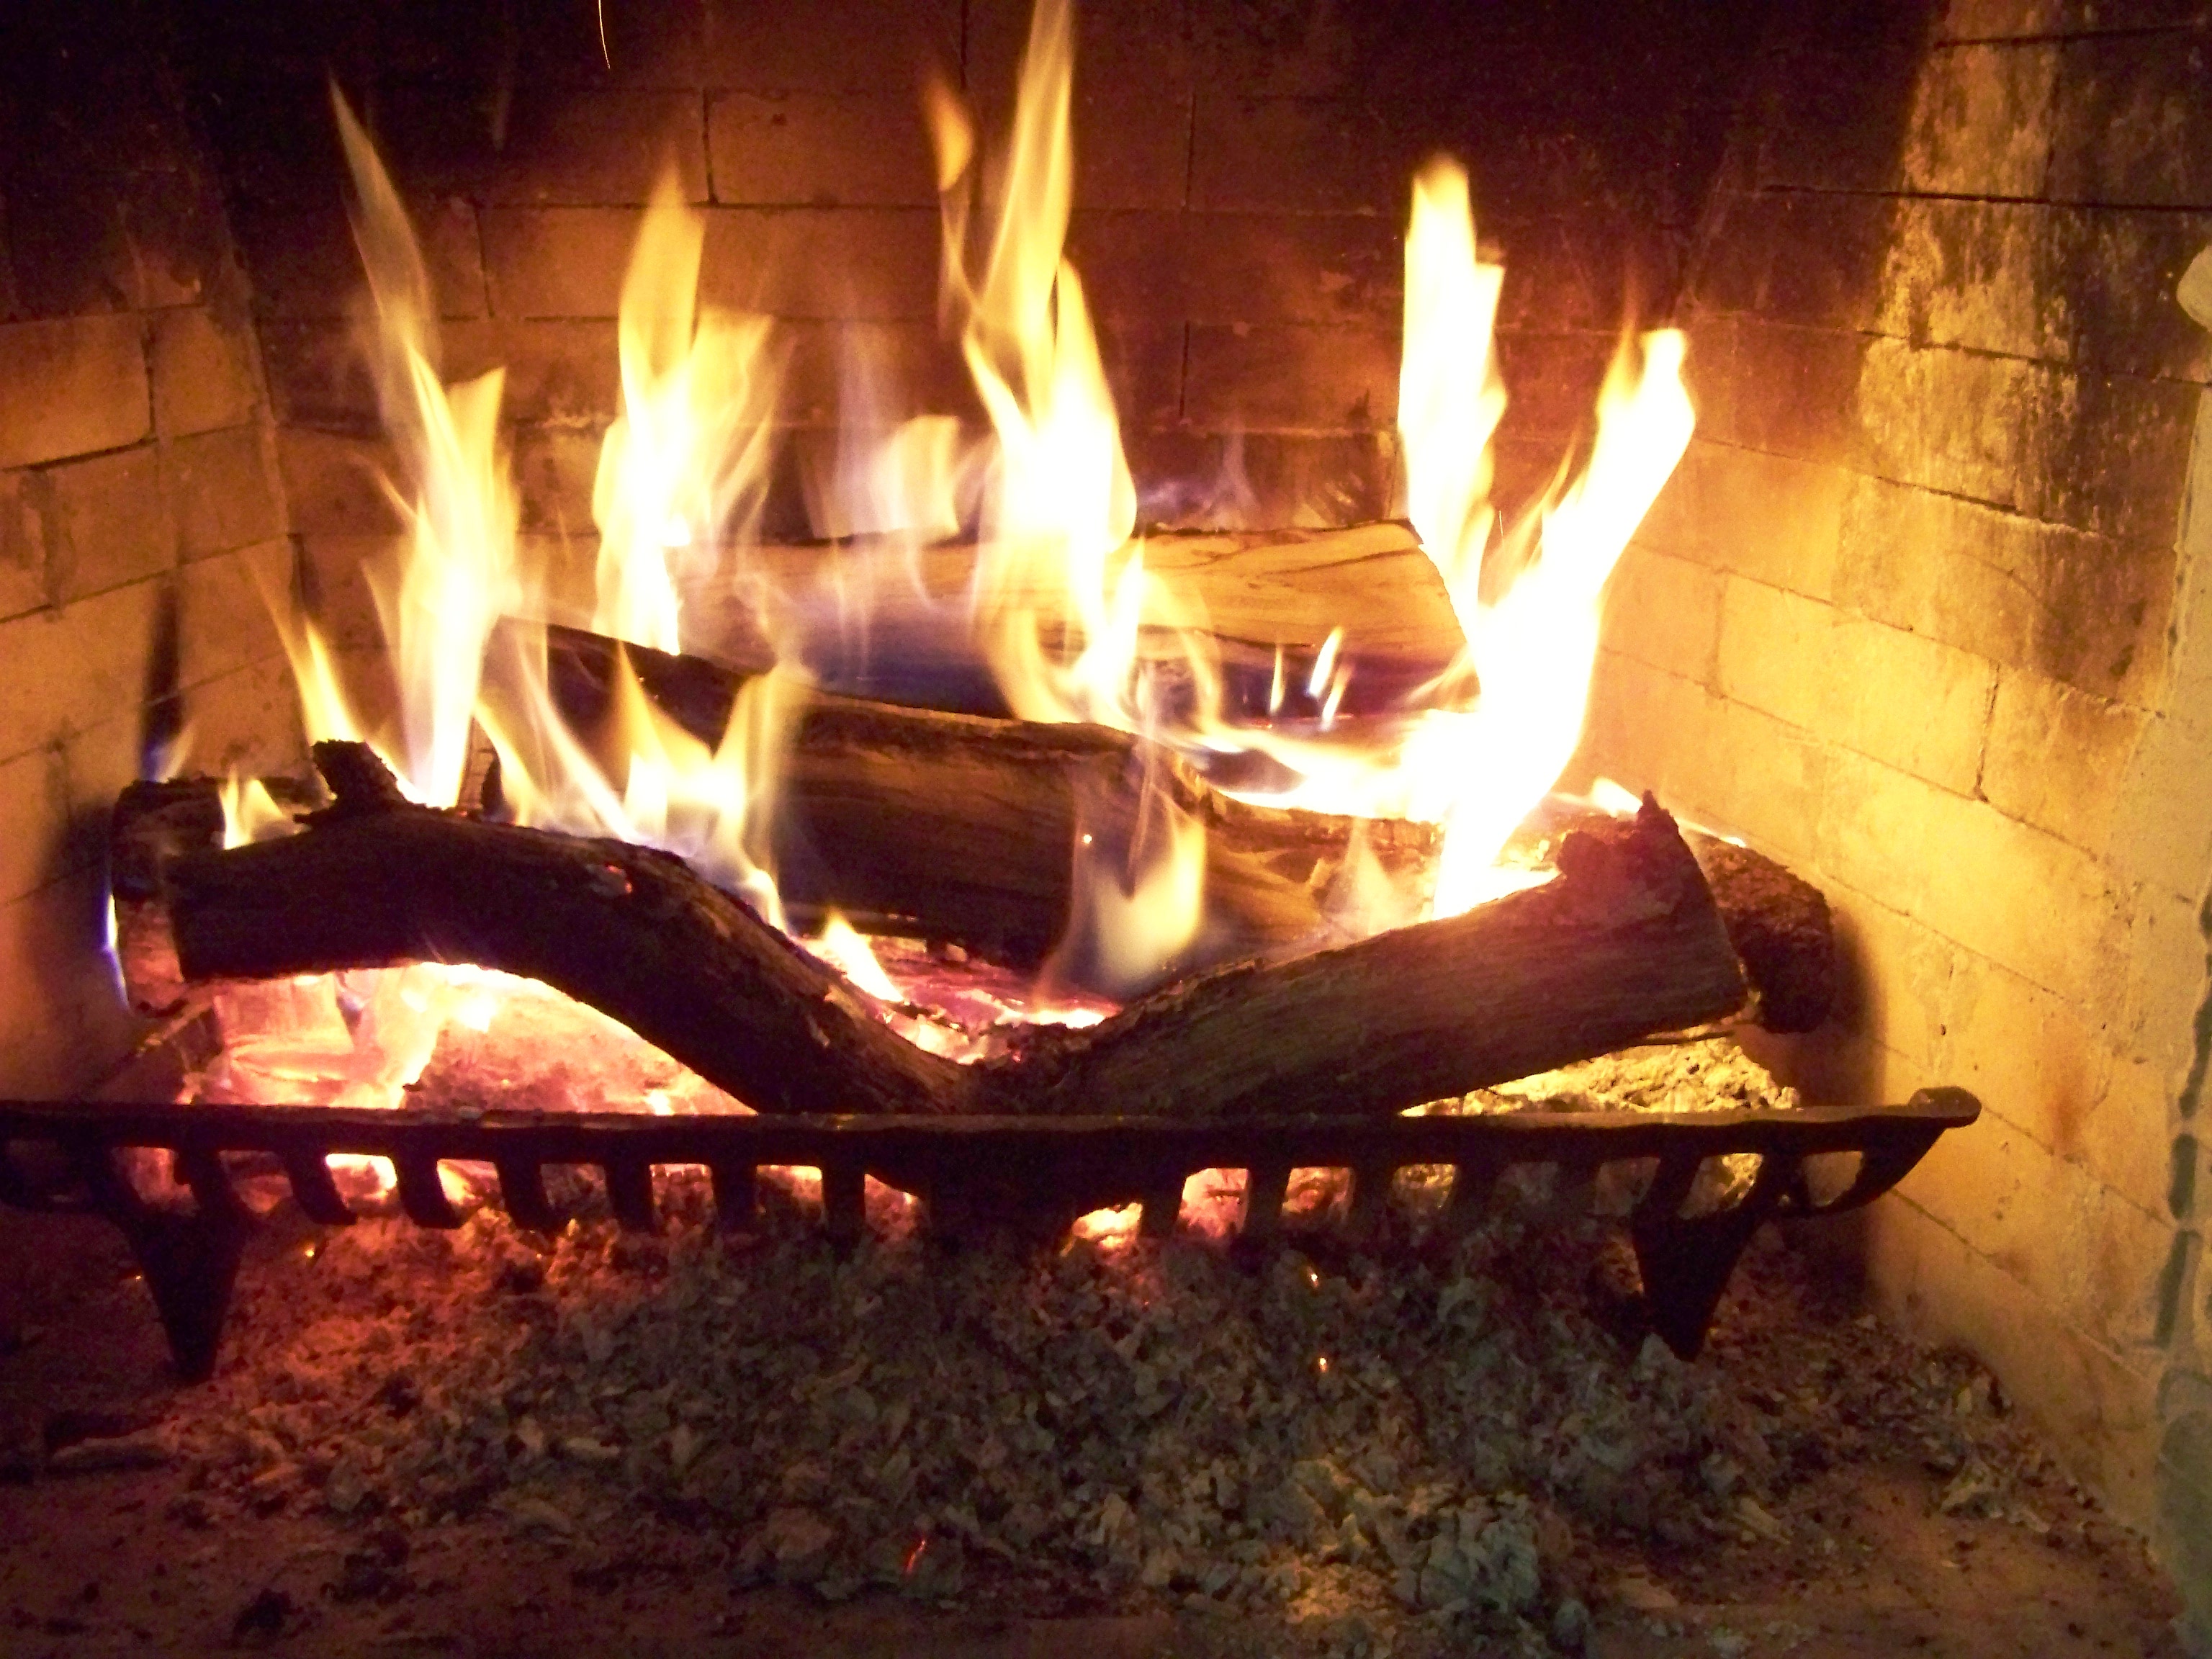 The meaning behind Housewarming - carrying in the embers to warm the home!